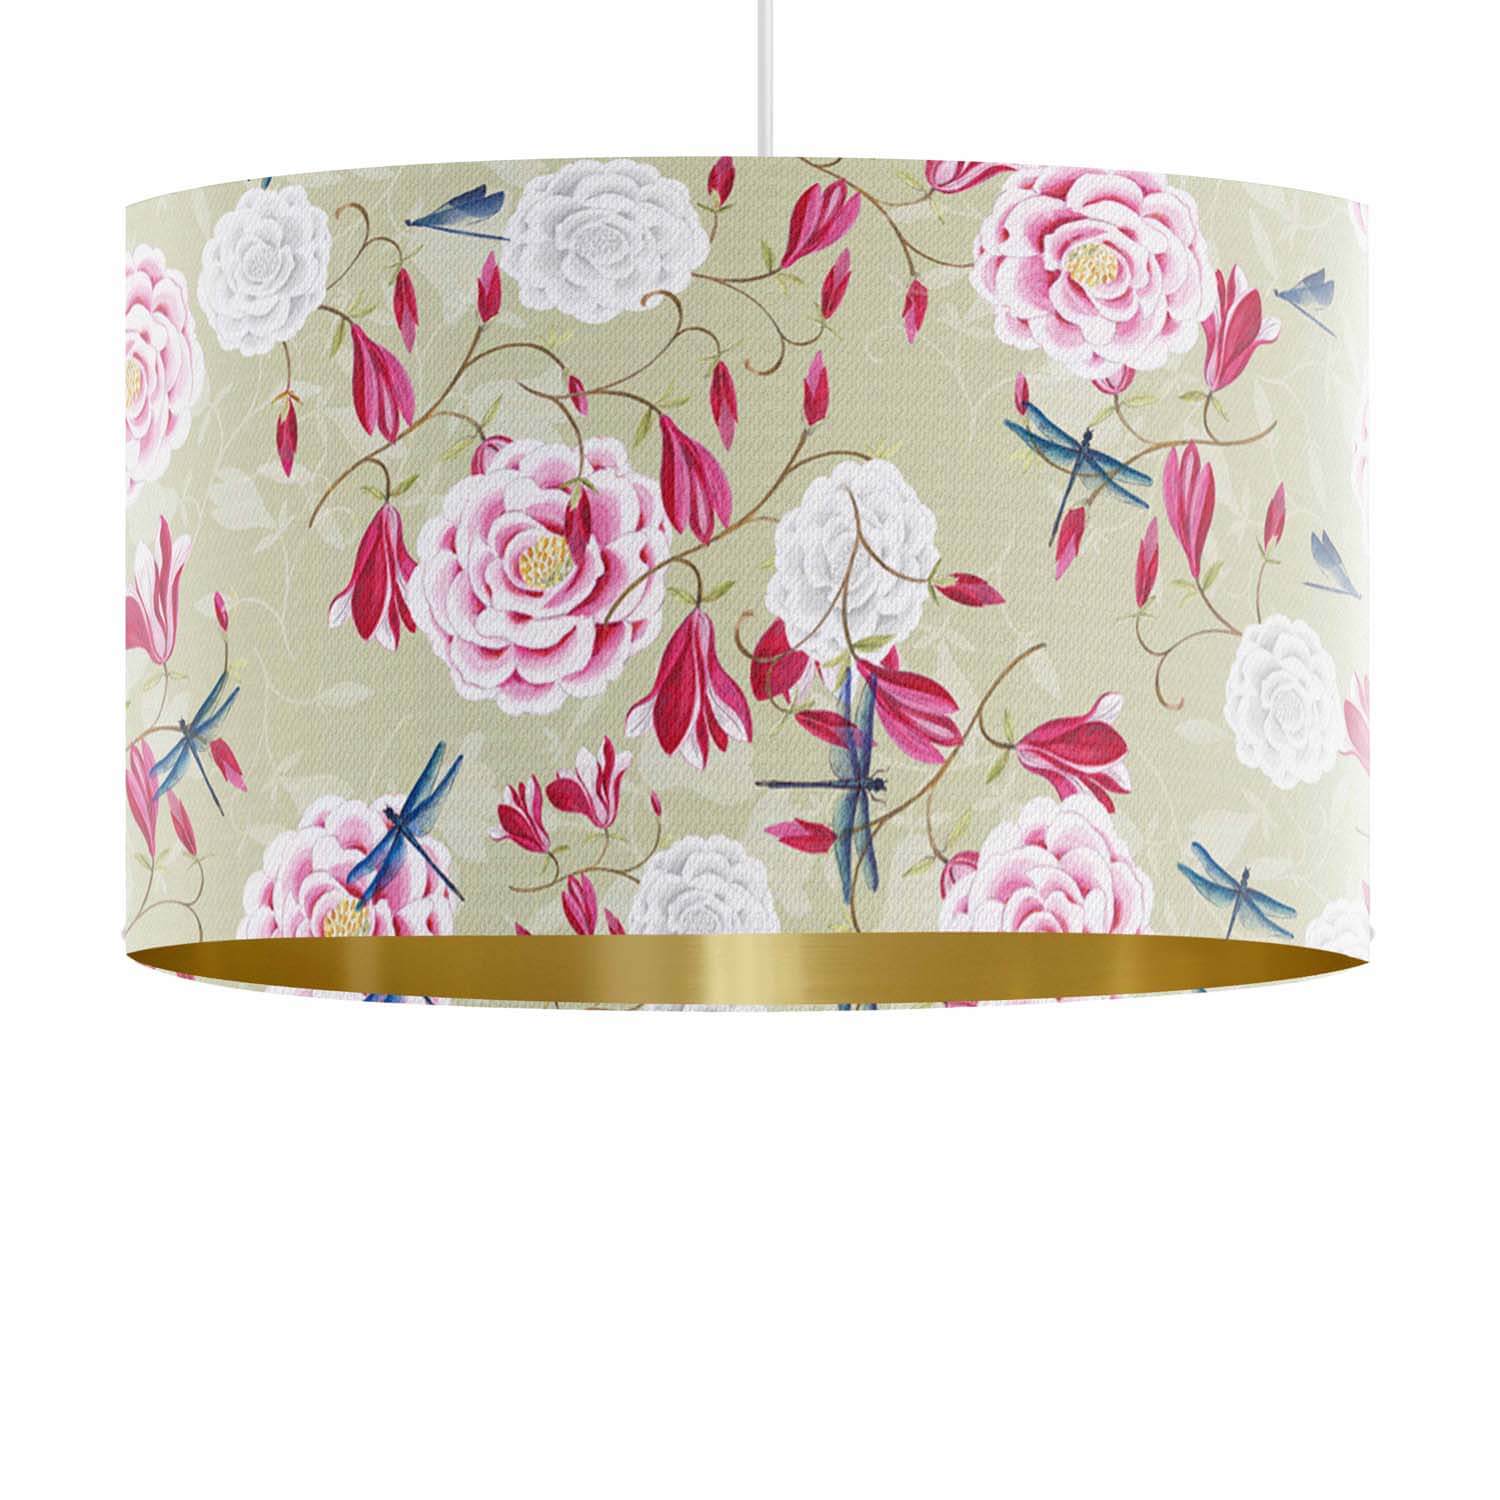 Magnolia & Roses - Garden Of Eden - House Of Turnowsky Lampshade